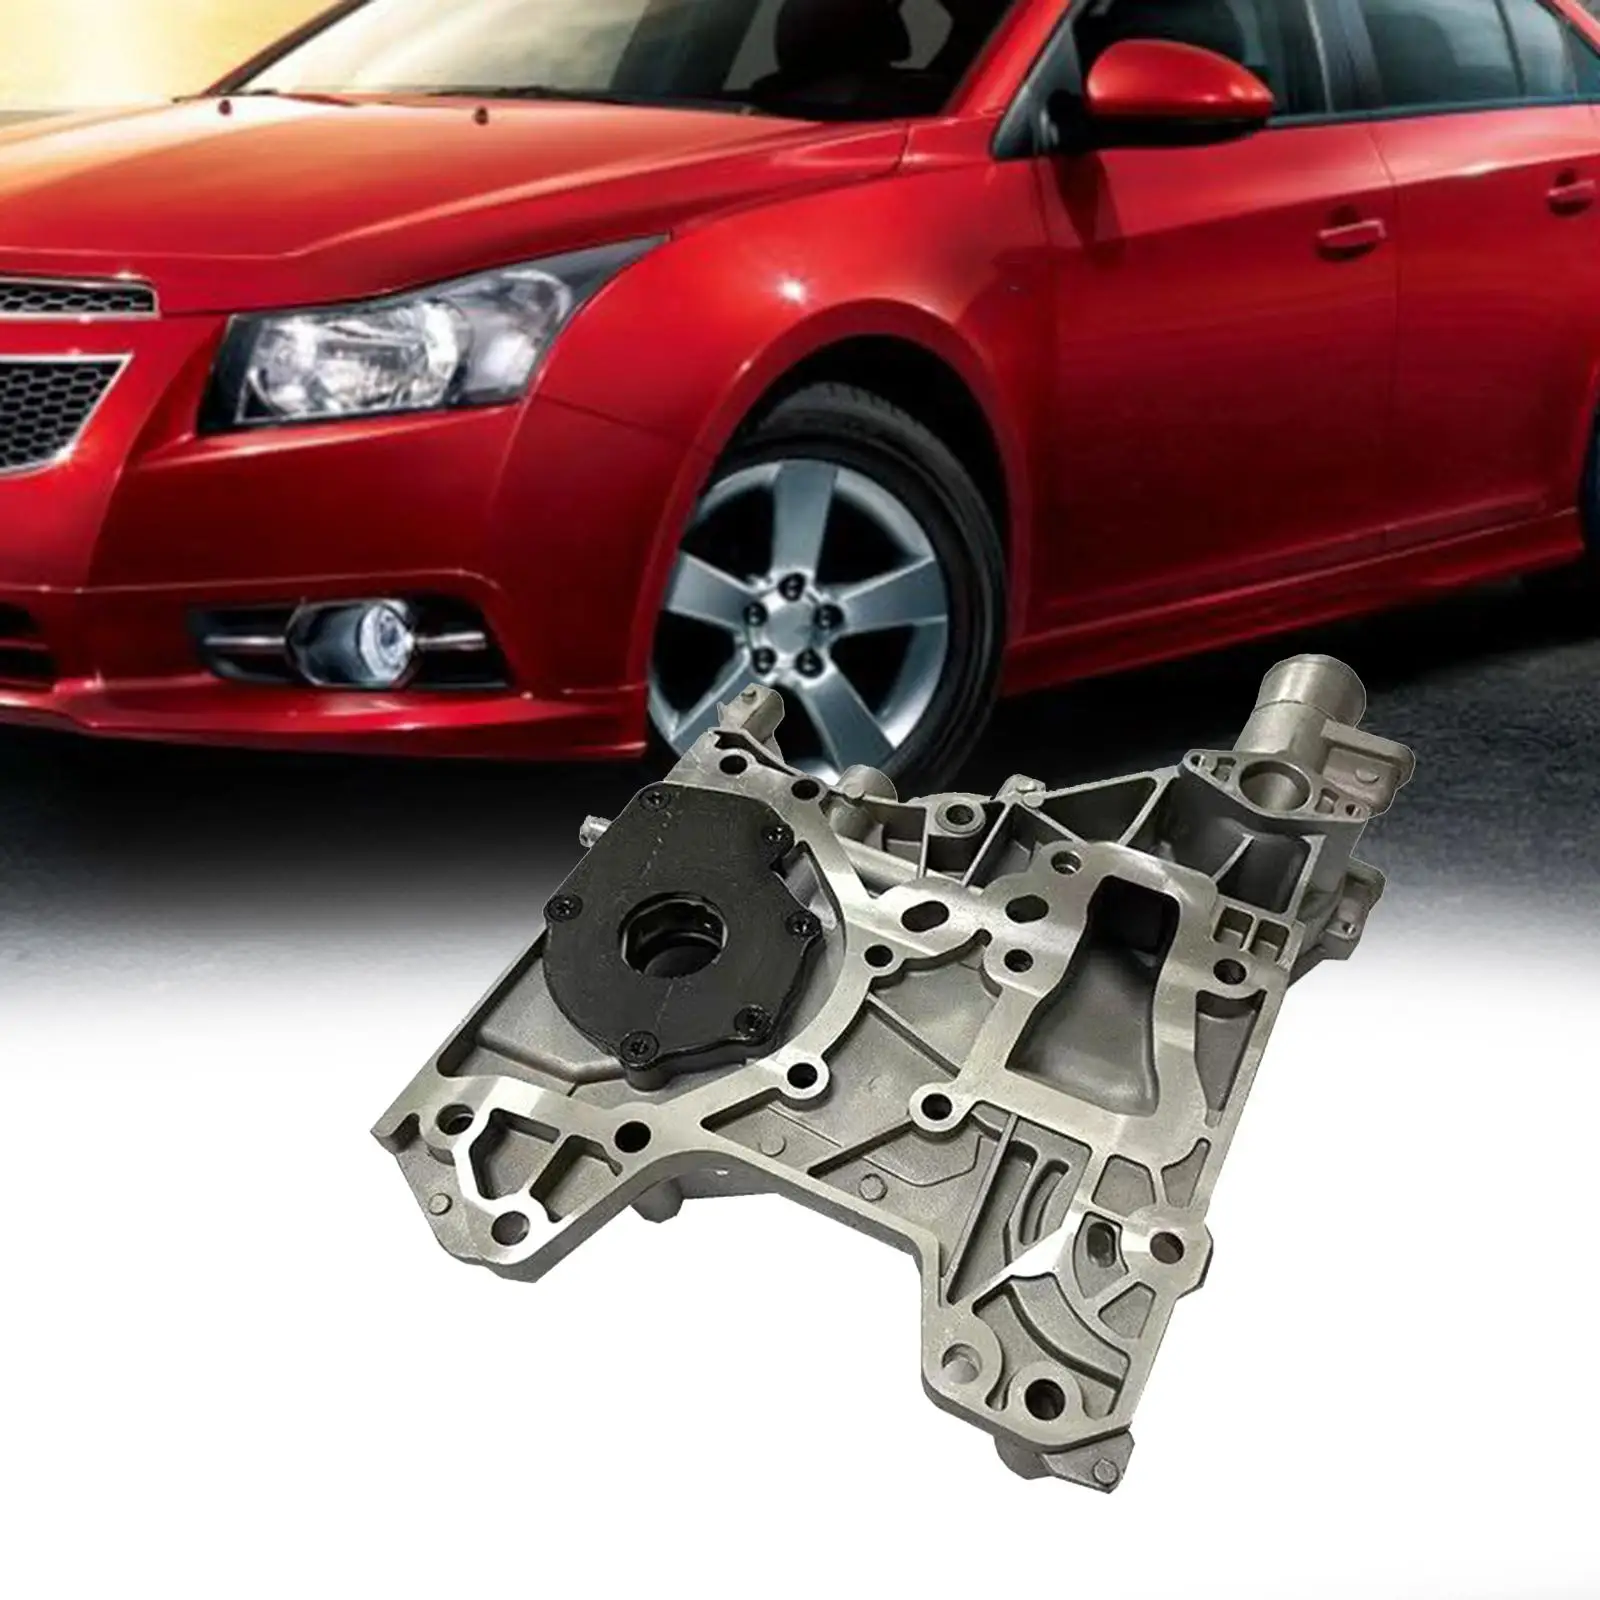 Oil Pump Engine Cover 55556428 25190867 Direct Replacement for Insignia Zafira Durable Automobile Repairing Accessory